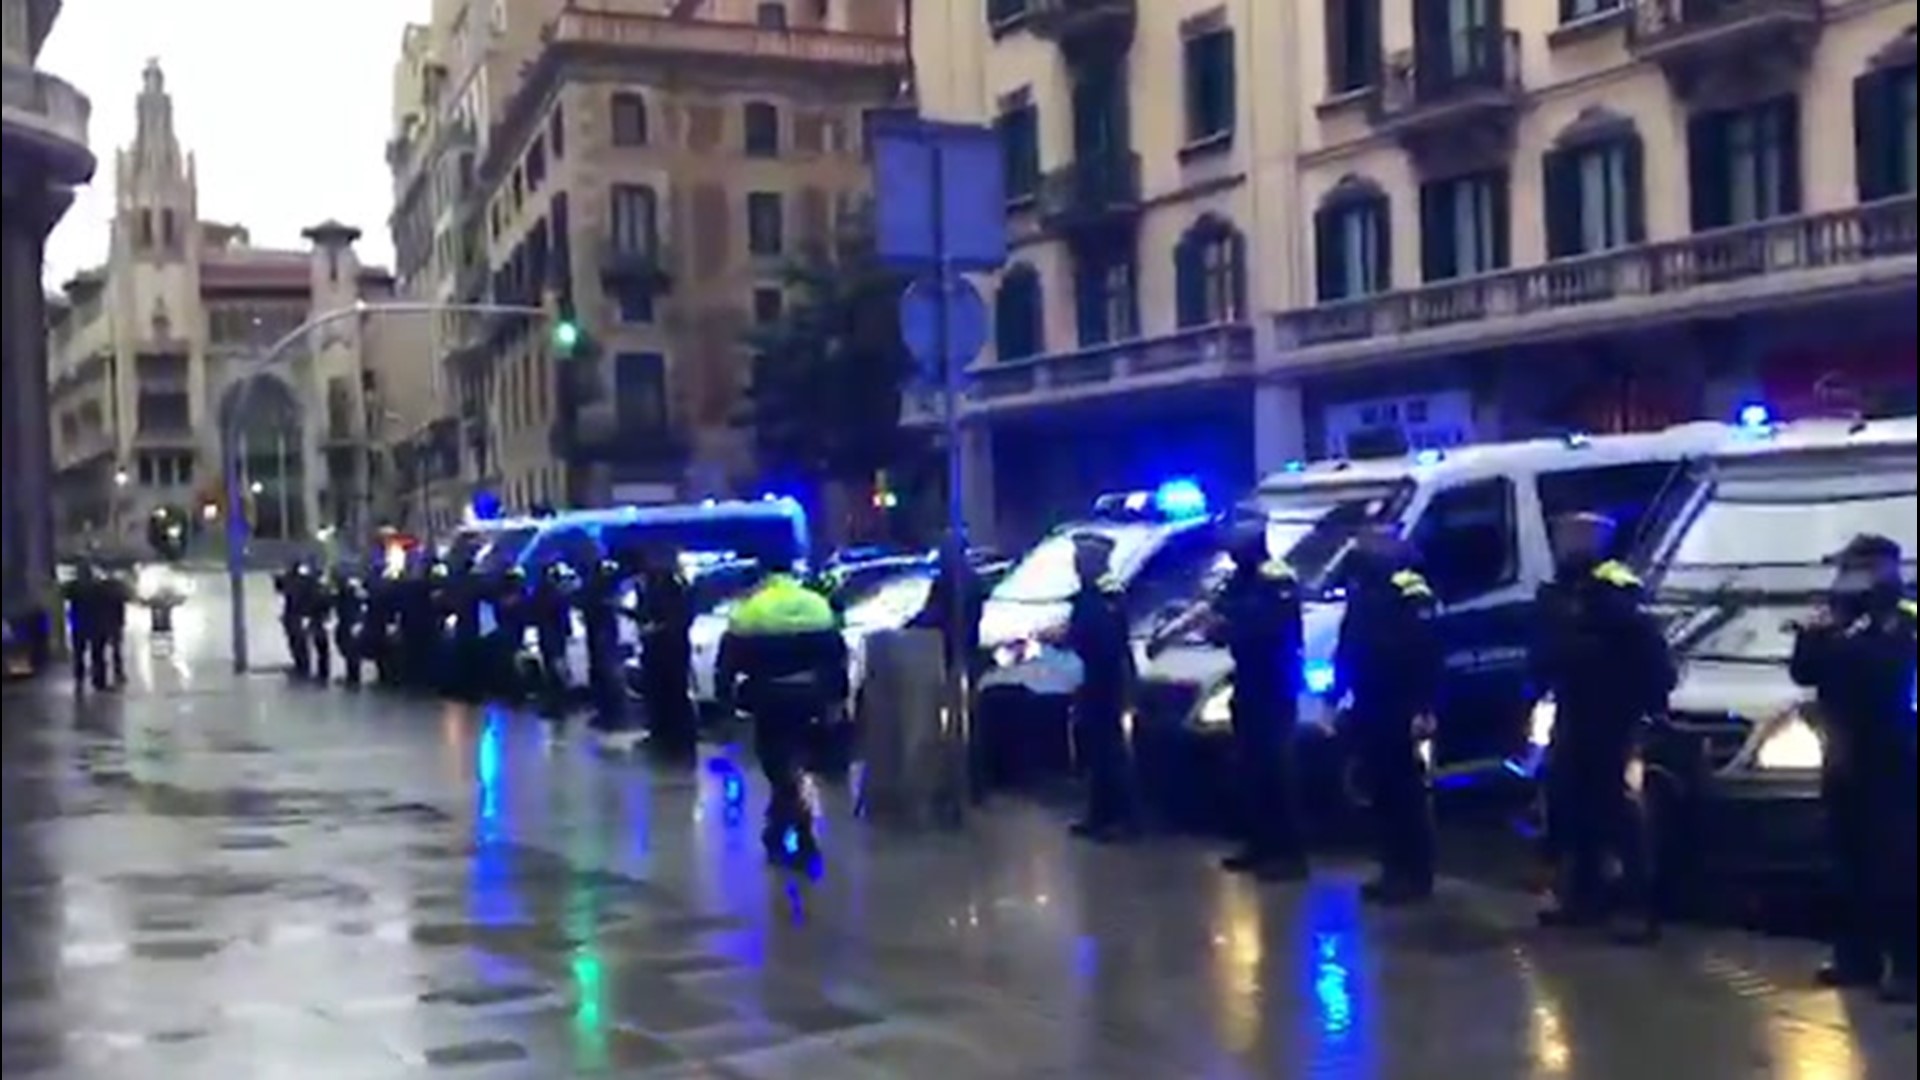 Police in Barcelona, Spain, lined up on April 1 to honor fellow police officer Jose Luis, who died due to complications from the coronavirus.